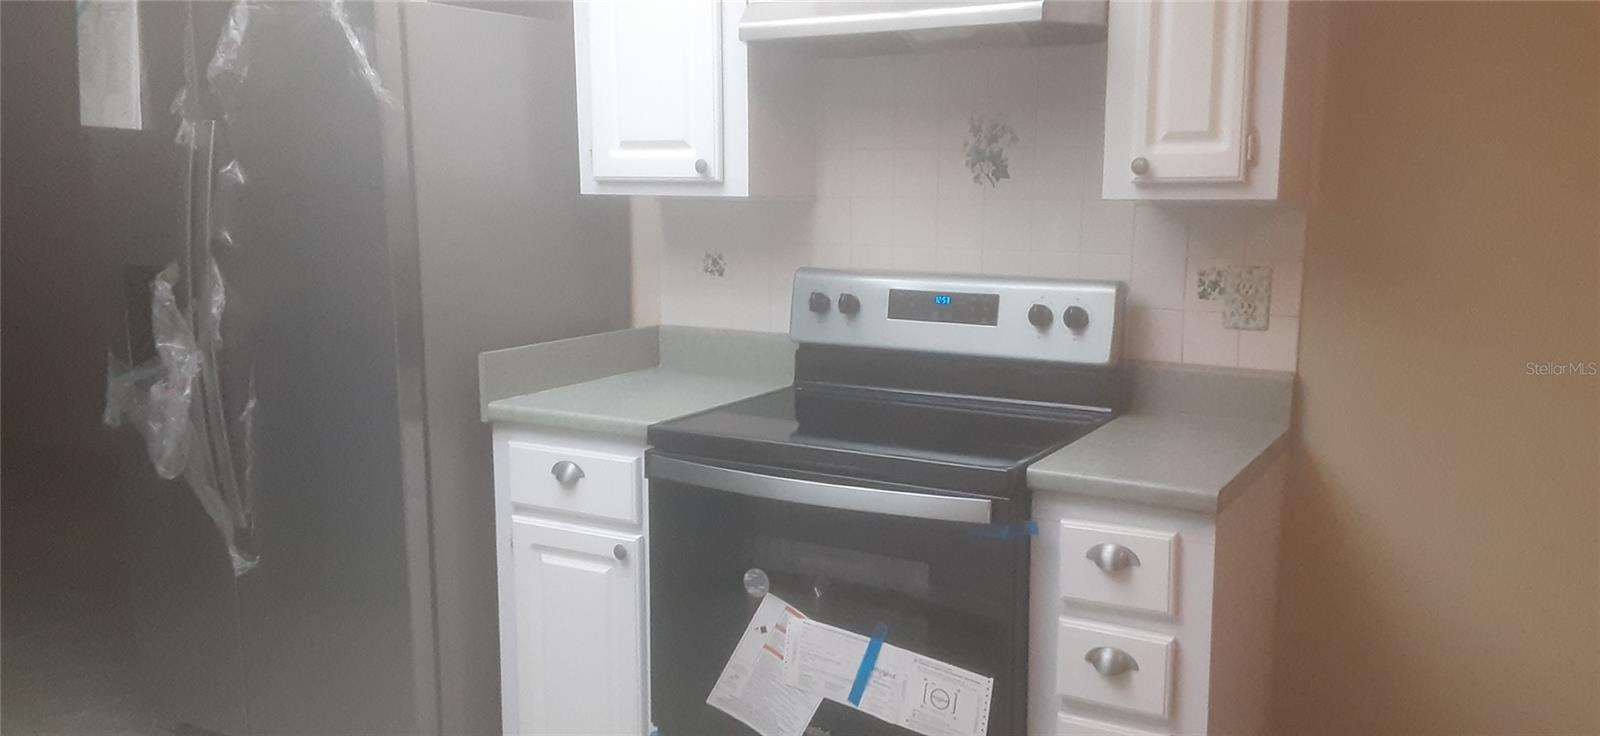 new stainless-steel appliances